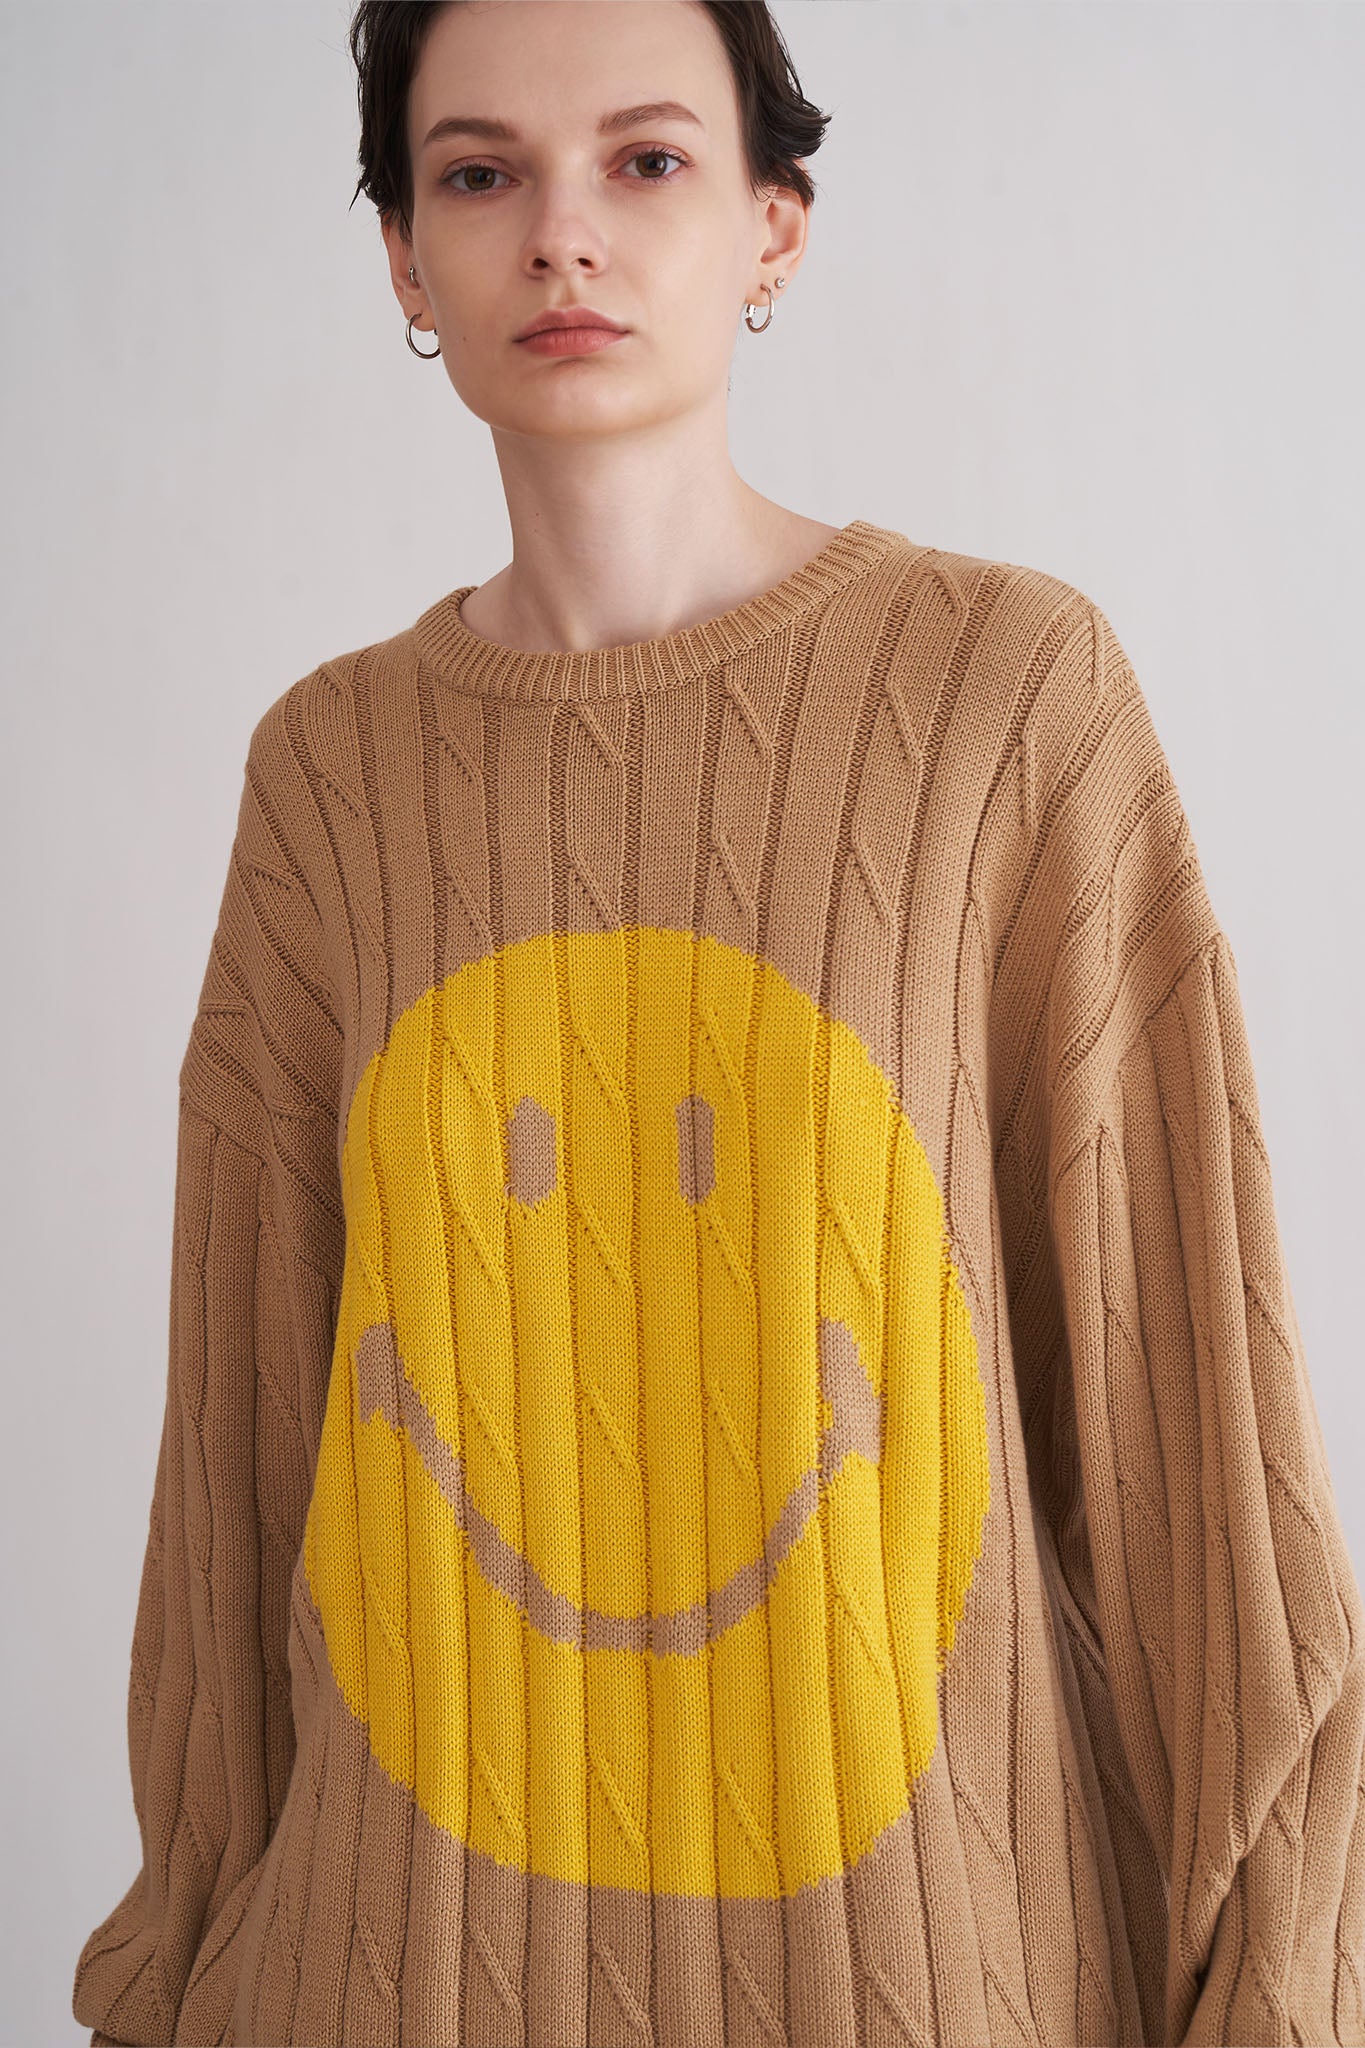 Smiley Knit Top